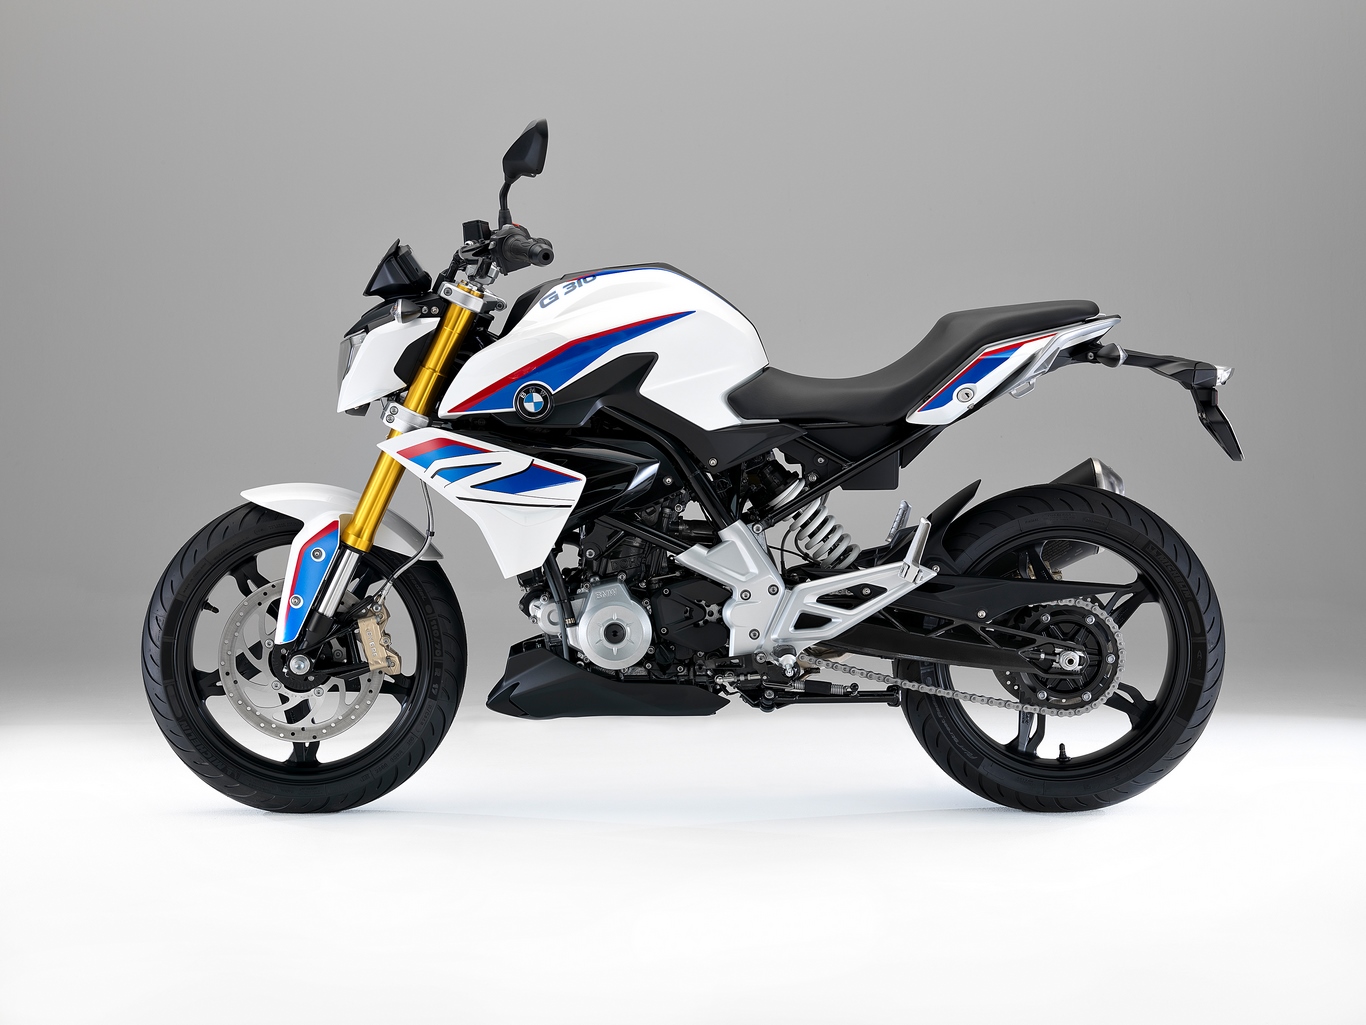 MY2018 BMW G310R released in the USA